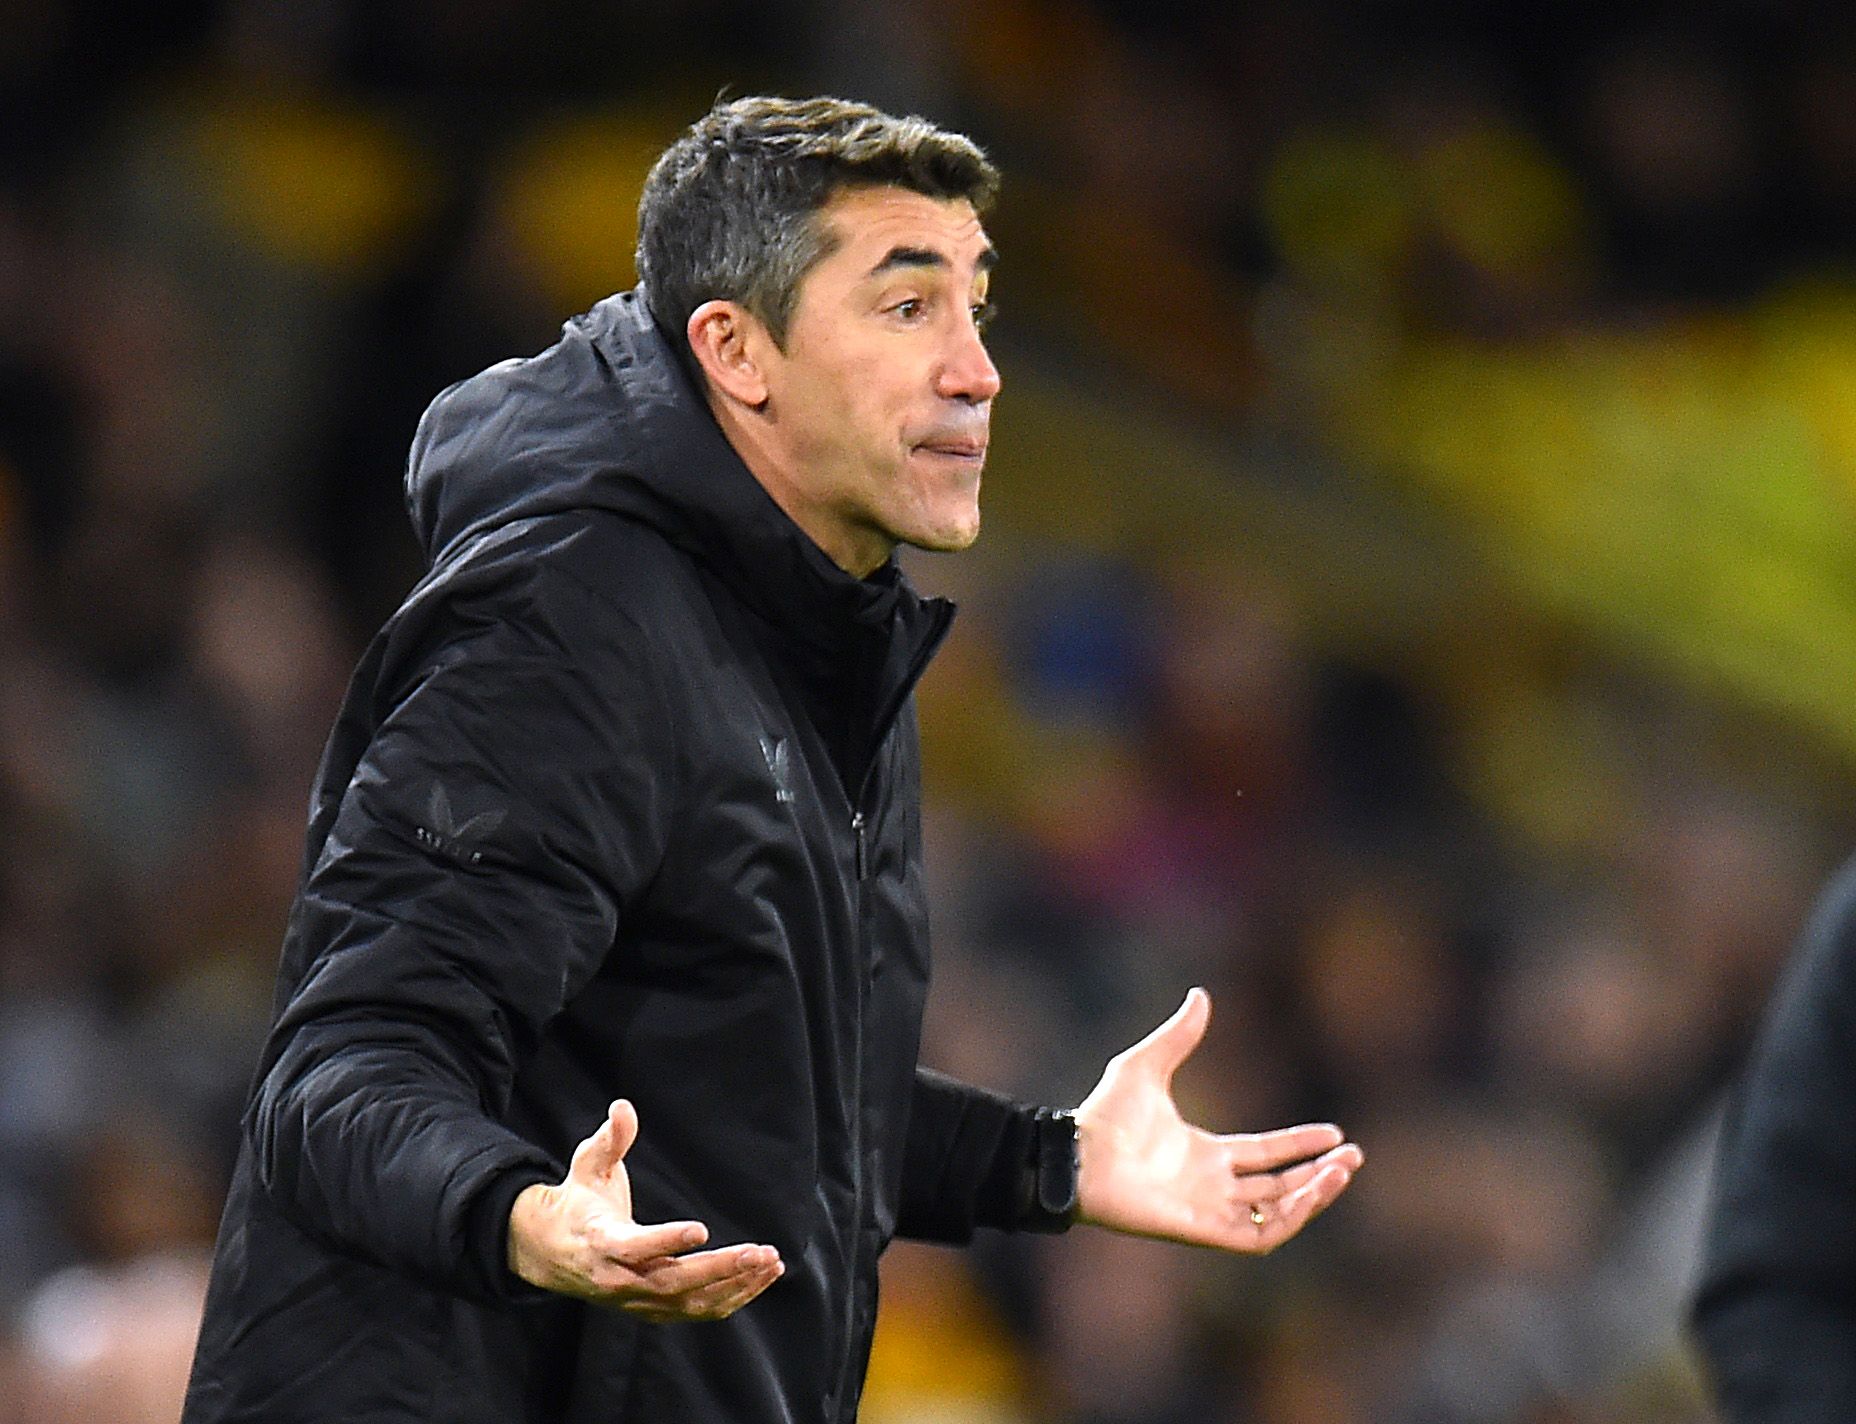 Bruno Lage, Fosun, Jeff Shi, Molineux, The Old Gold, Wolves, Wolves fans, Wolves info, Wolves latest, Wolves news, Wolves updates, WWFC, WWFC news, WWFC update, Premier League, Premier League news, Wolverhampton Wanderers, Wolves transfer news, January transfer window, Carlos Salcedo, 
